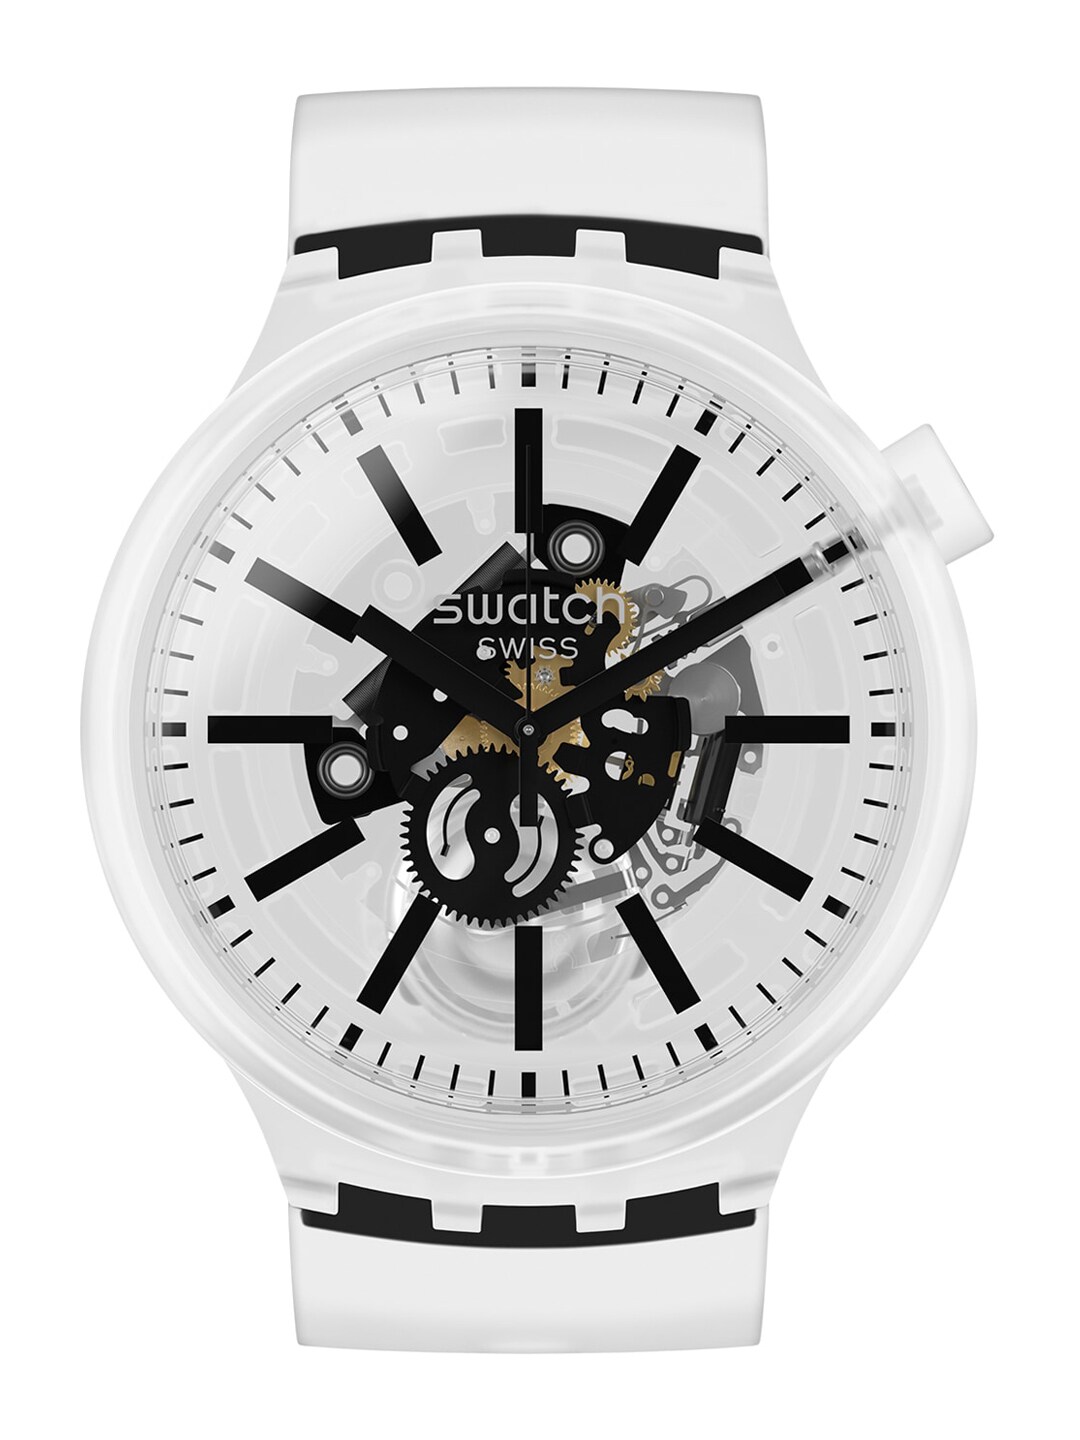 Swatch Unisex White Patterned Dial & White Bracelet Style Straps Analogue Watch Price in India